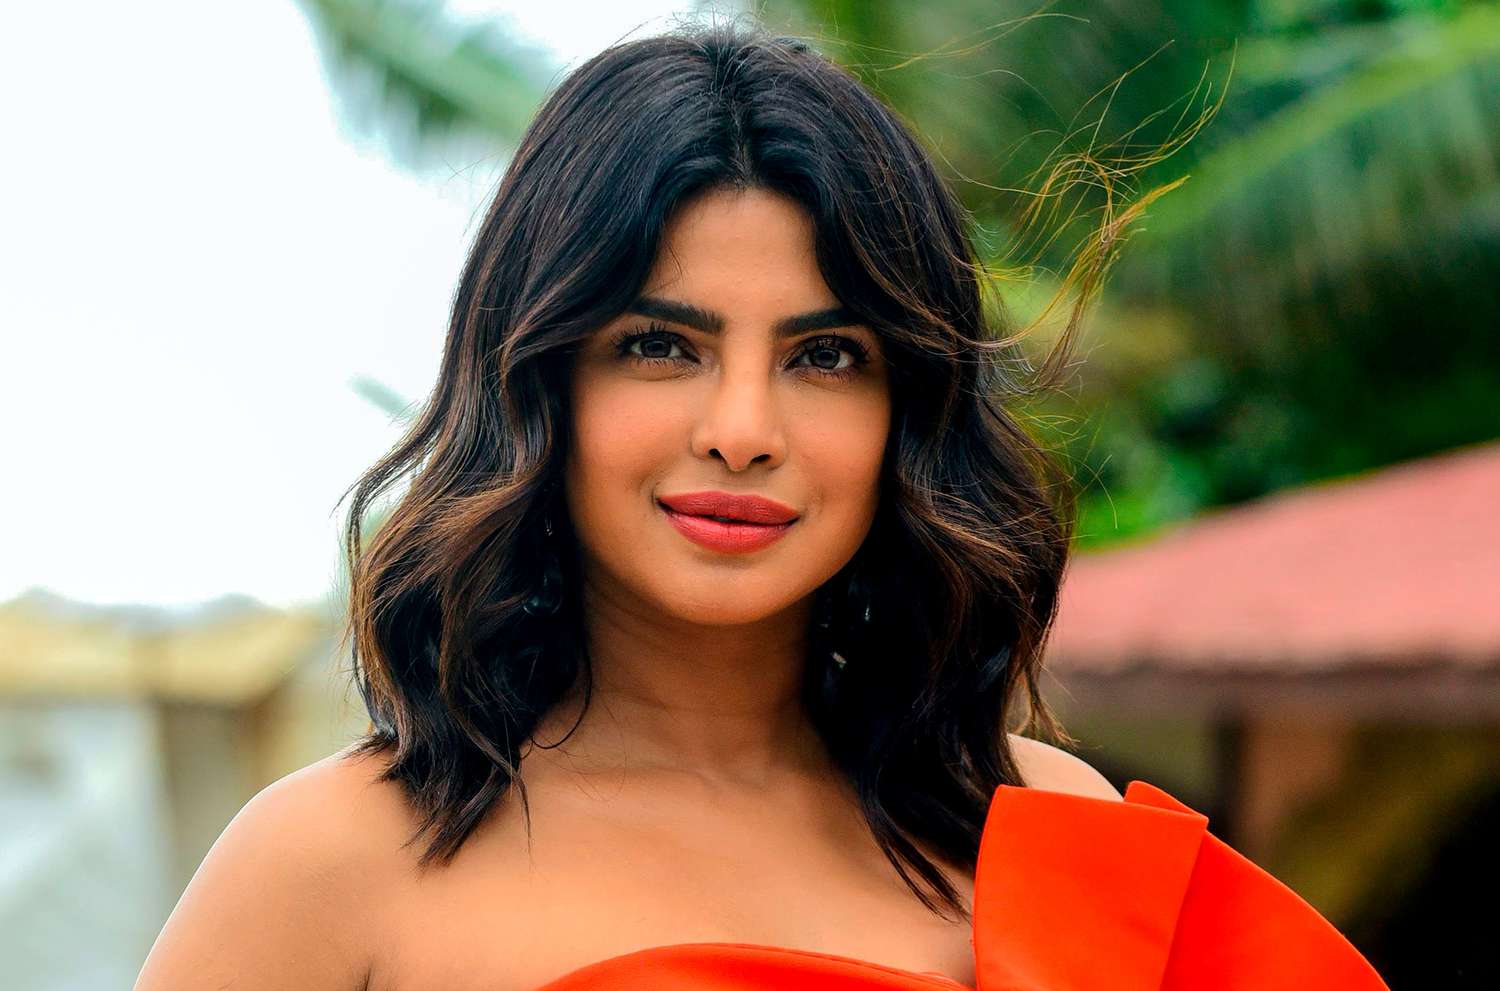 actress Priyanka Chopra Jonas poses for photographs during the promotion of the upcoming film